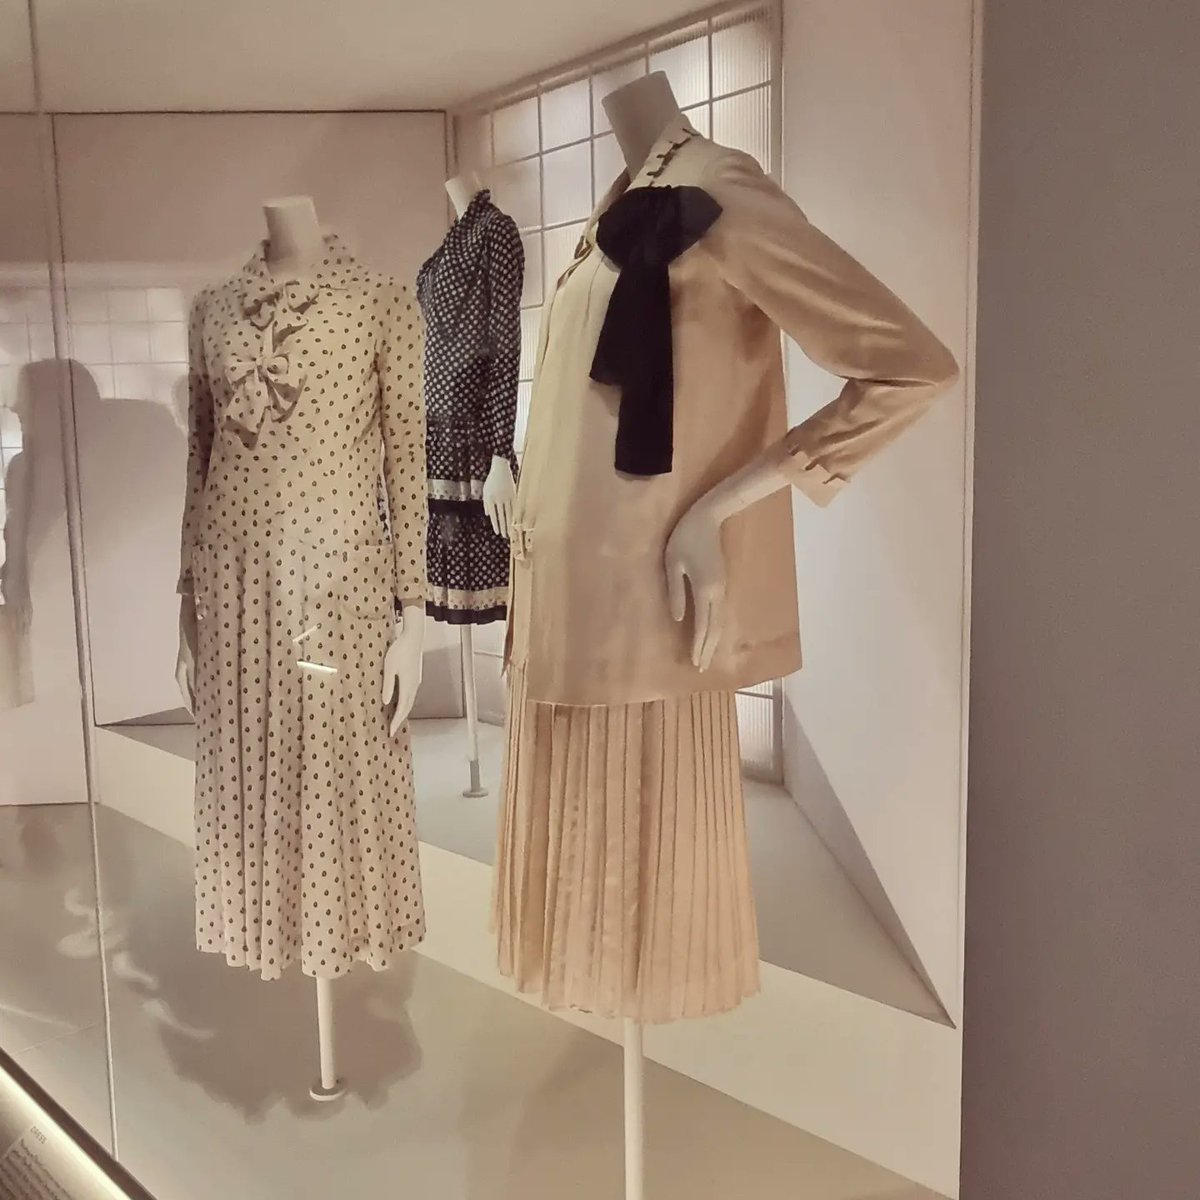 Highlights from the #CHANEL exhibition at the @V_and_A... including the revelation of 'dinner pyjamas!'